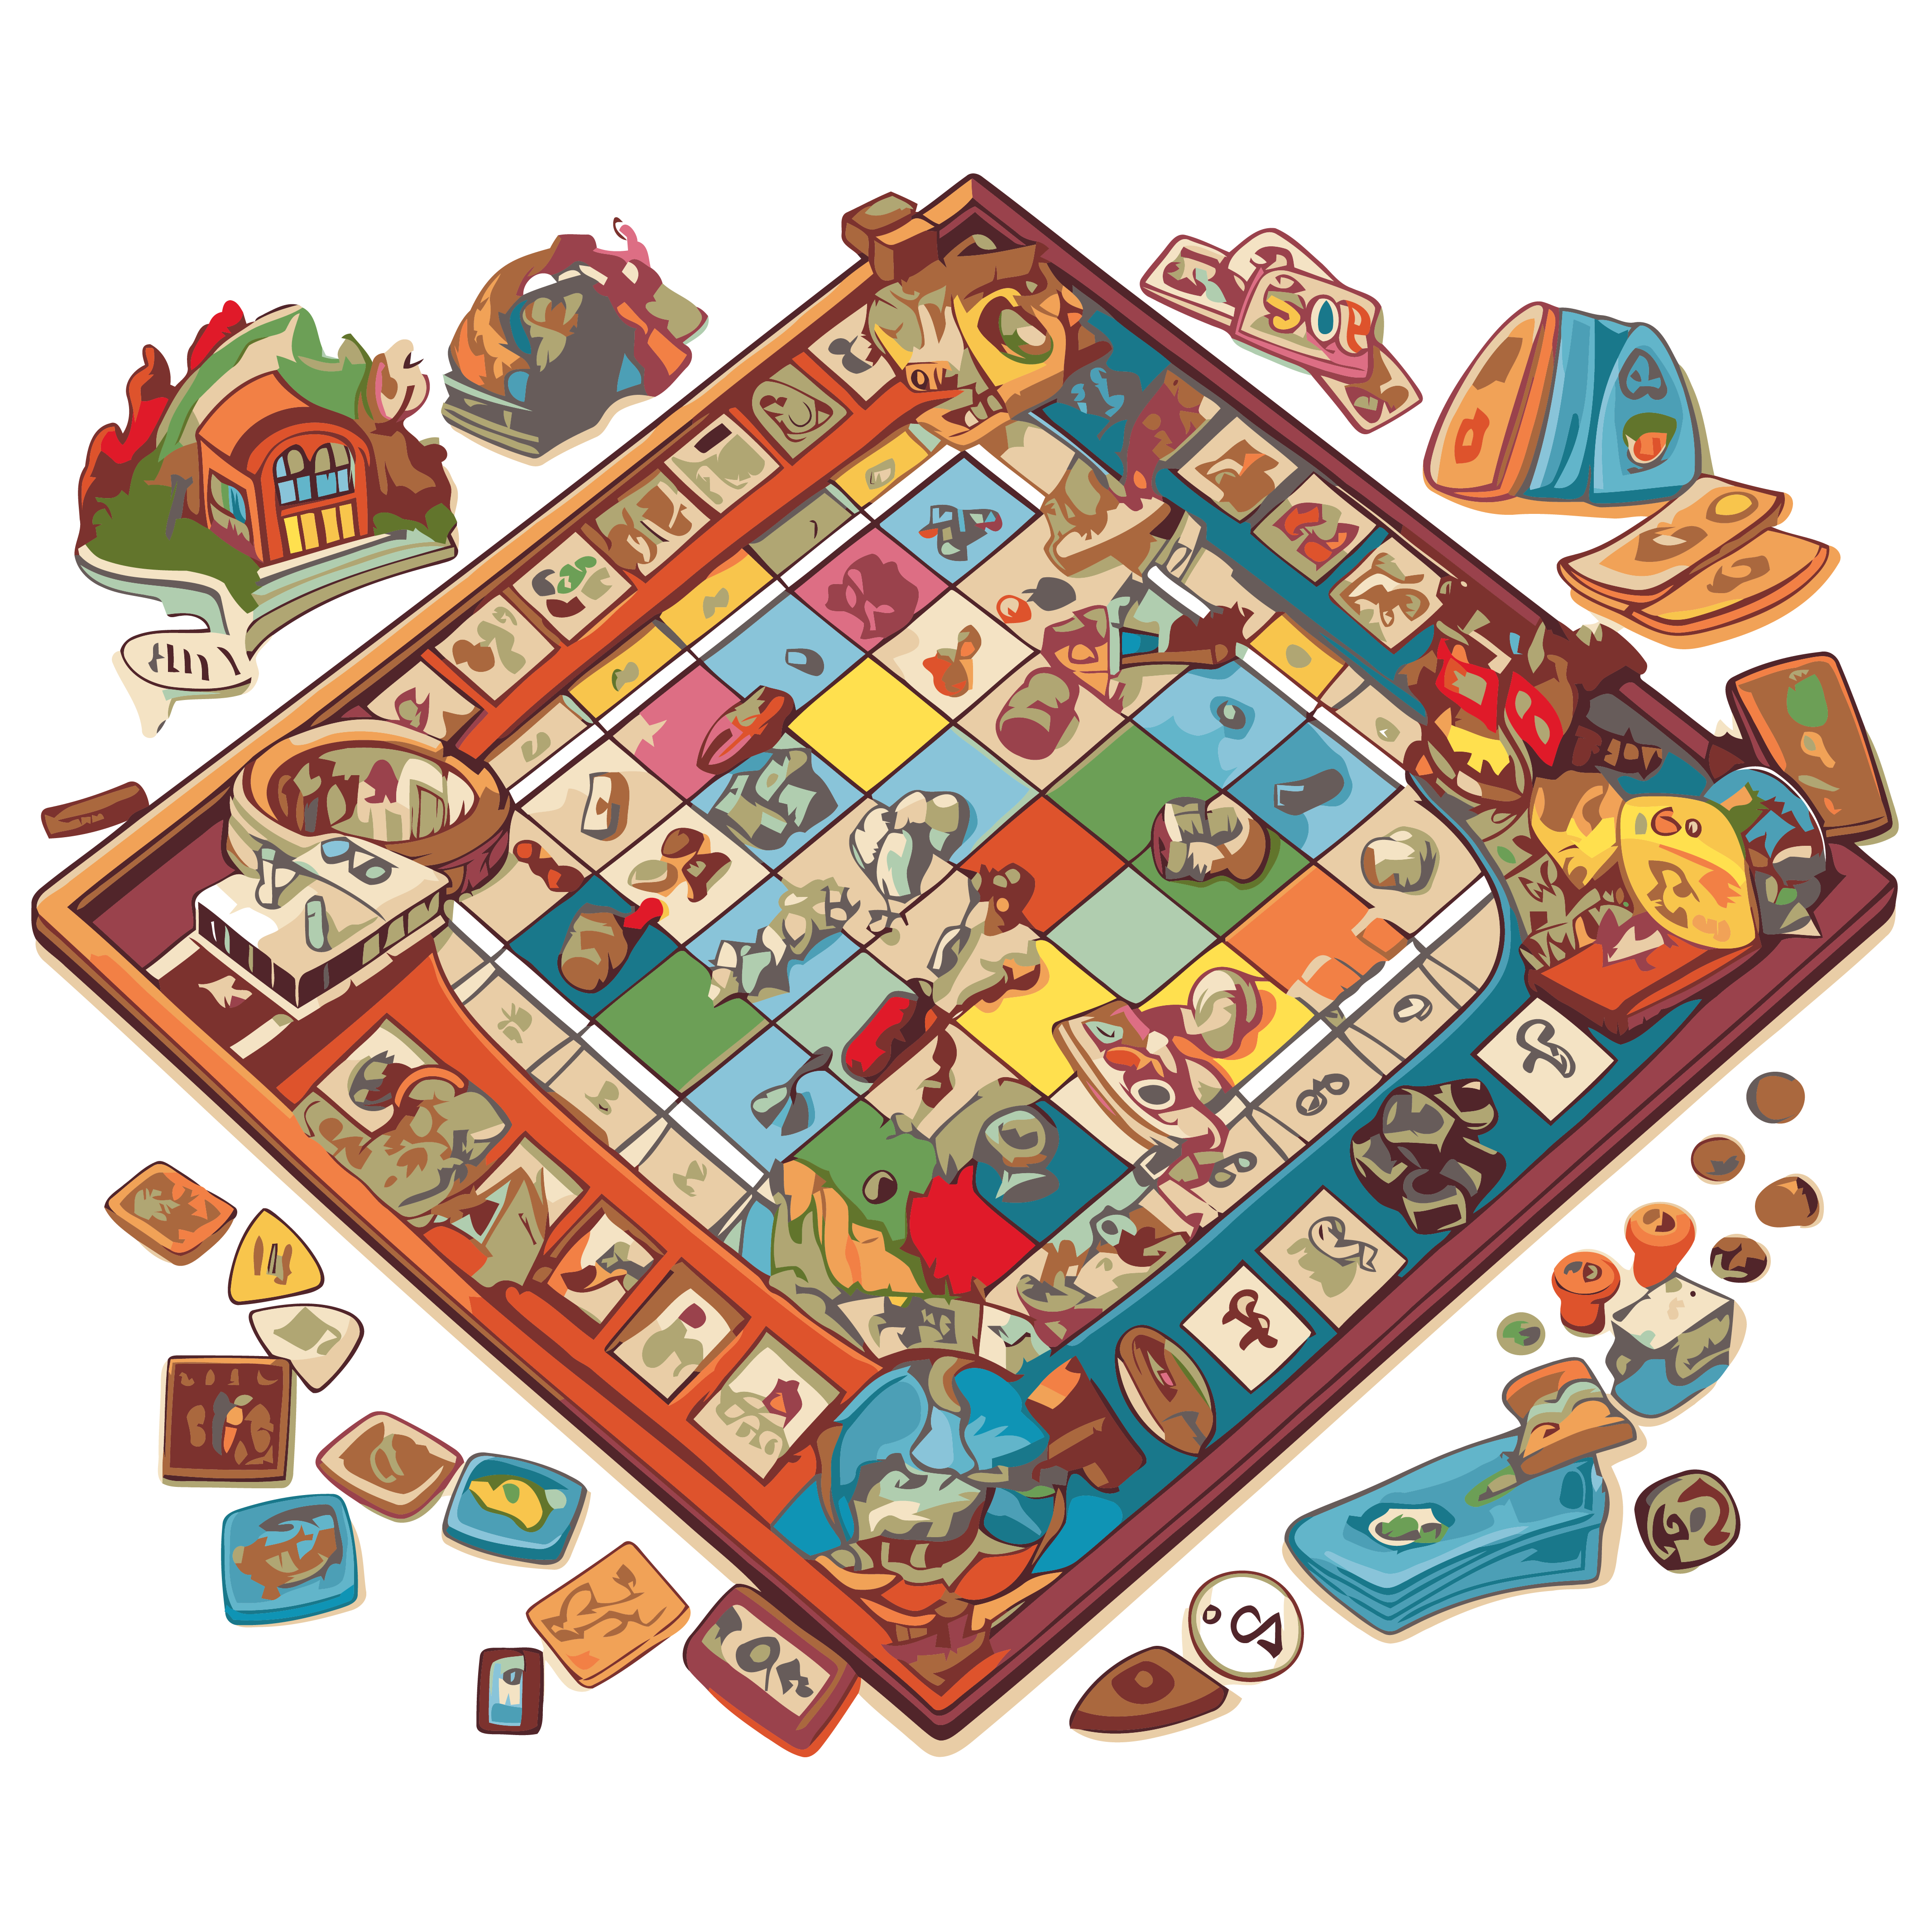 —Pngtree—boardgame clipart board game with_11070219